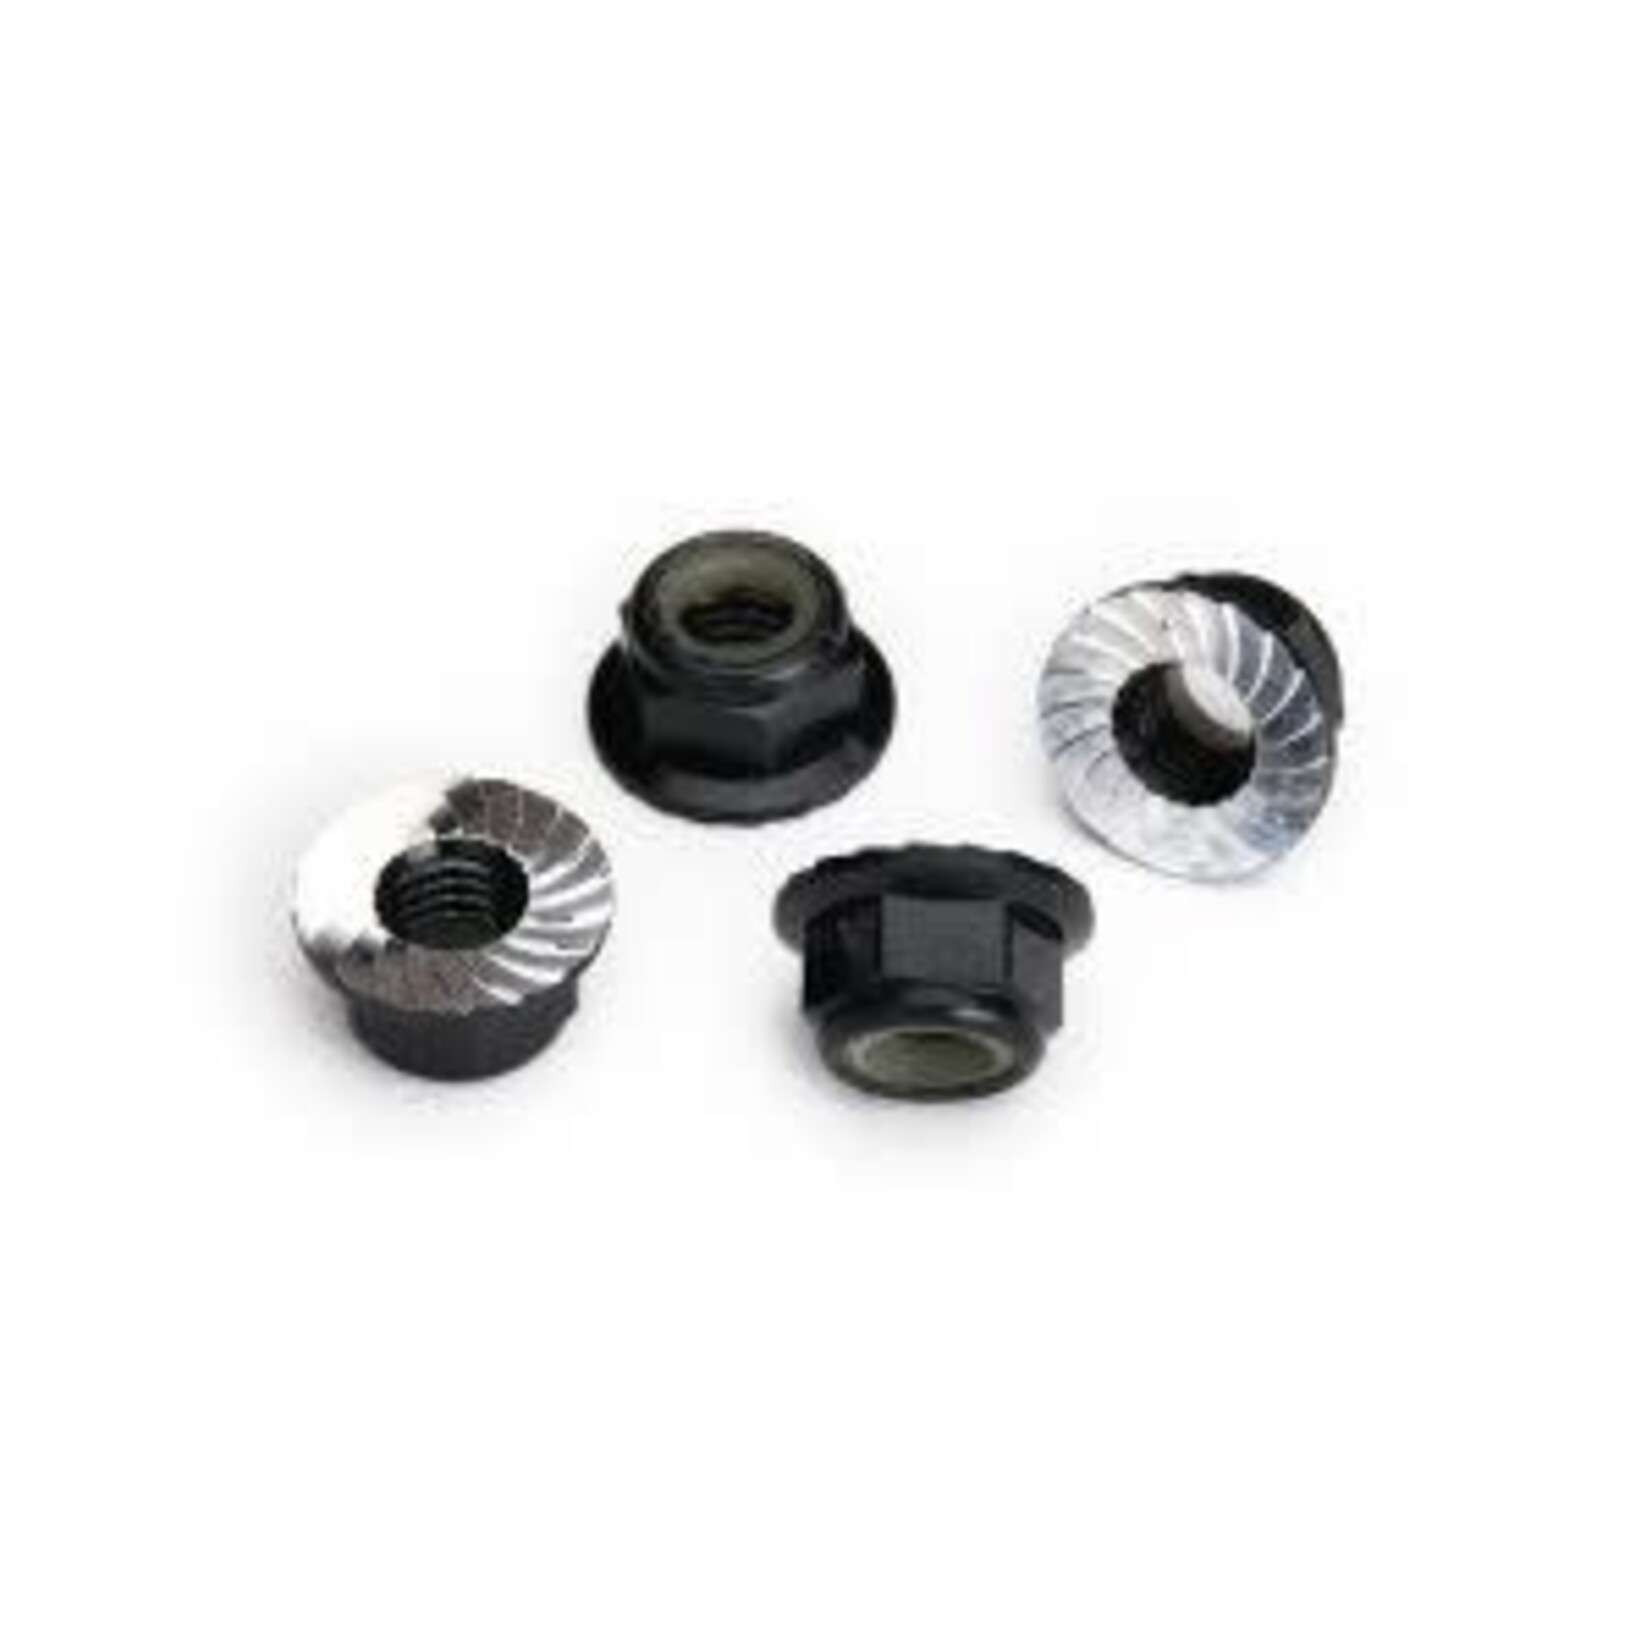 Traxxas 8447A Nuts, 5mm flanged nylon locking (aluminum, black-anodized, serrated) (4)